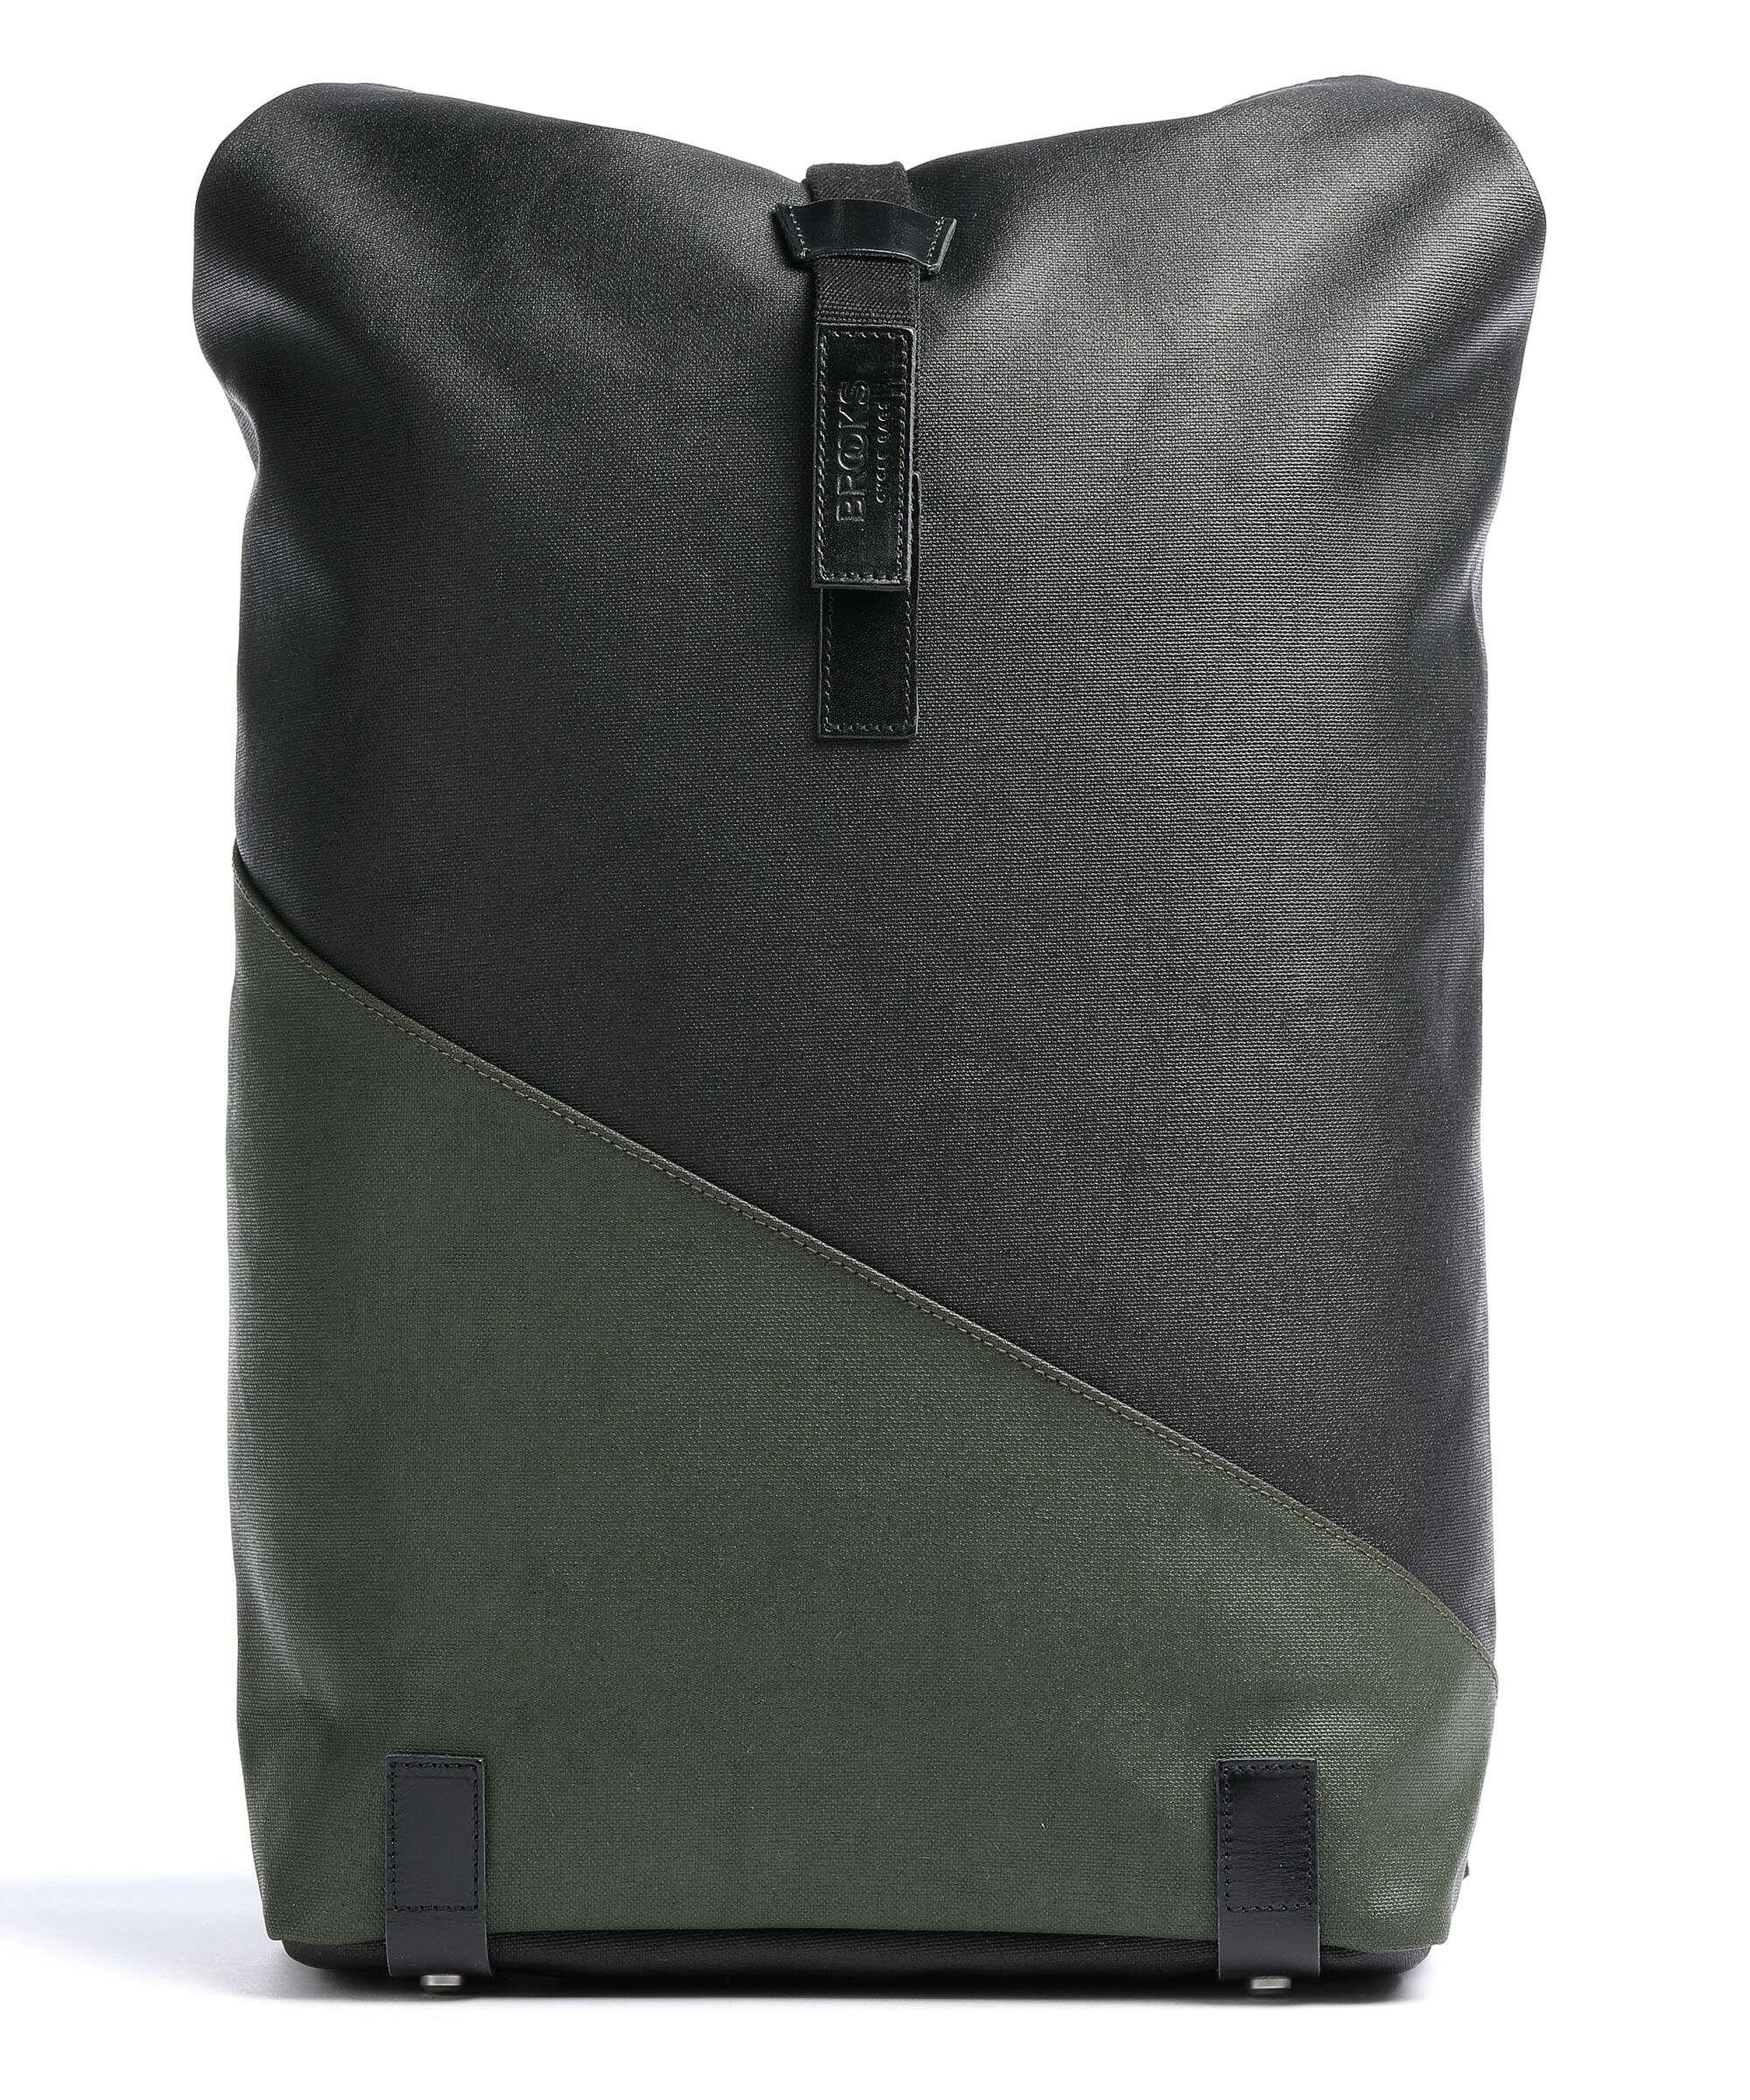 Brooks England Pickwick Cotton Canvas 26L Backpack Total Black at CareOfCar